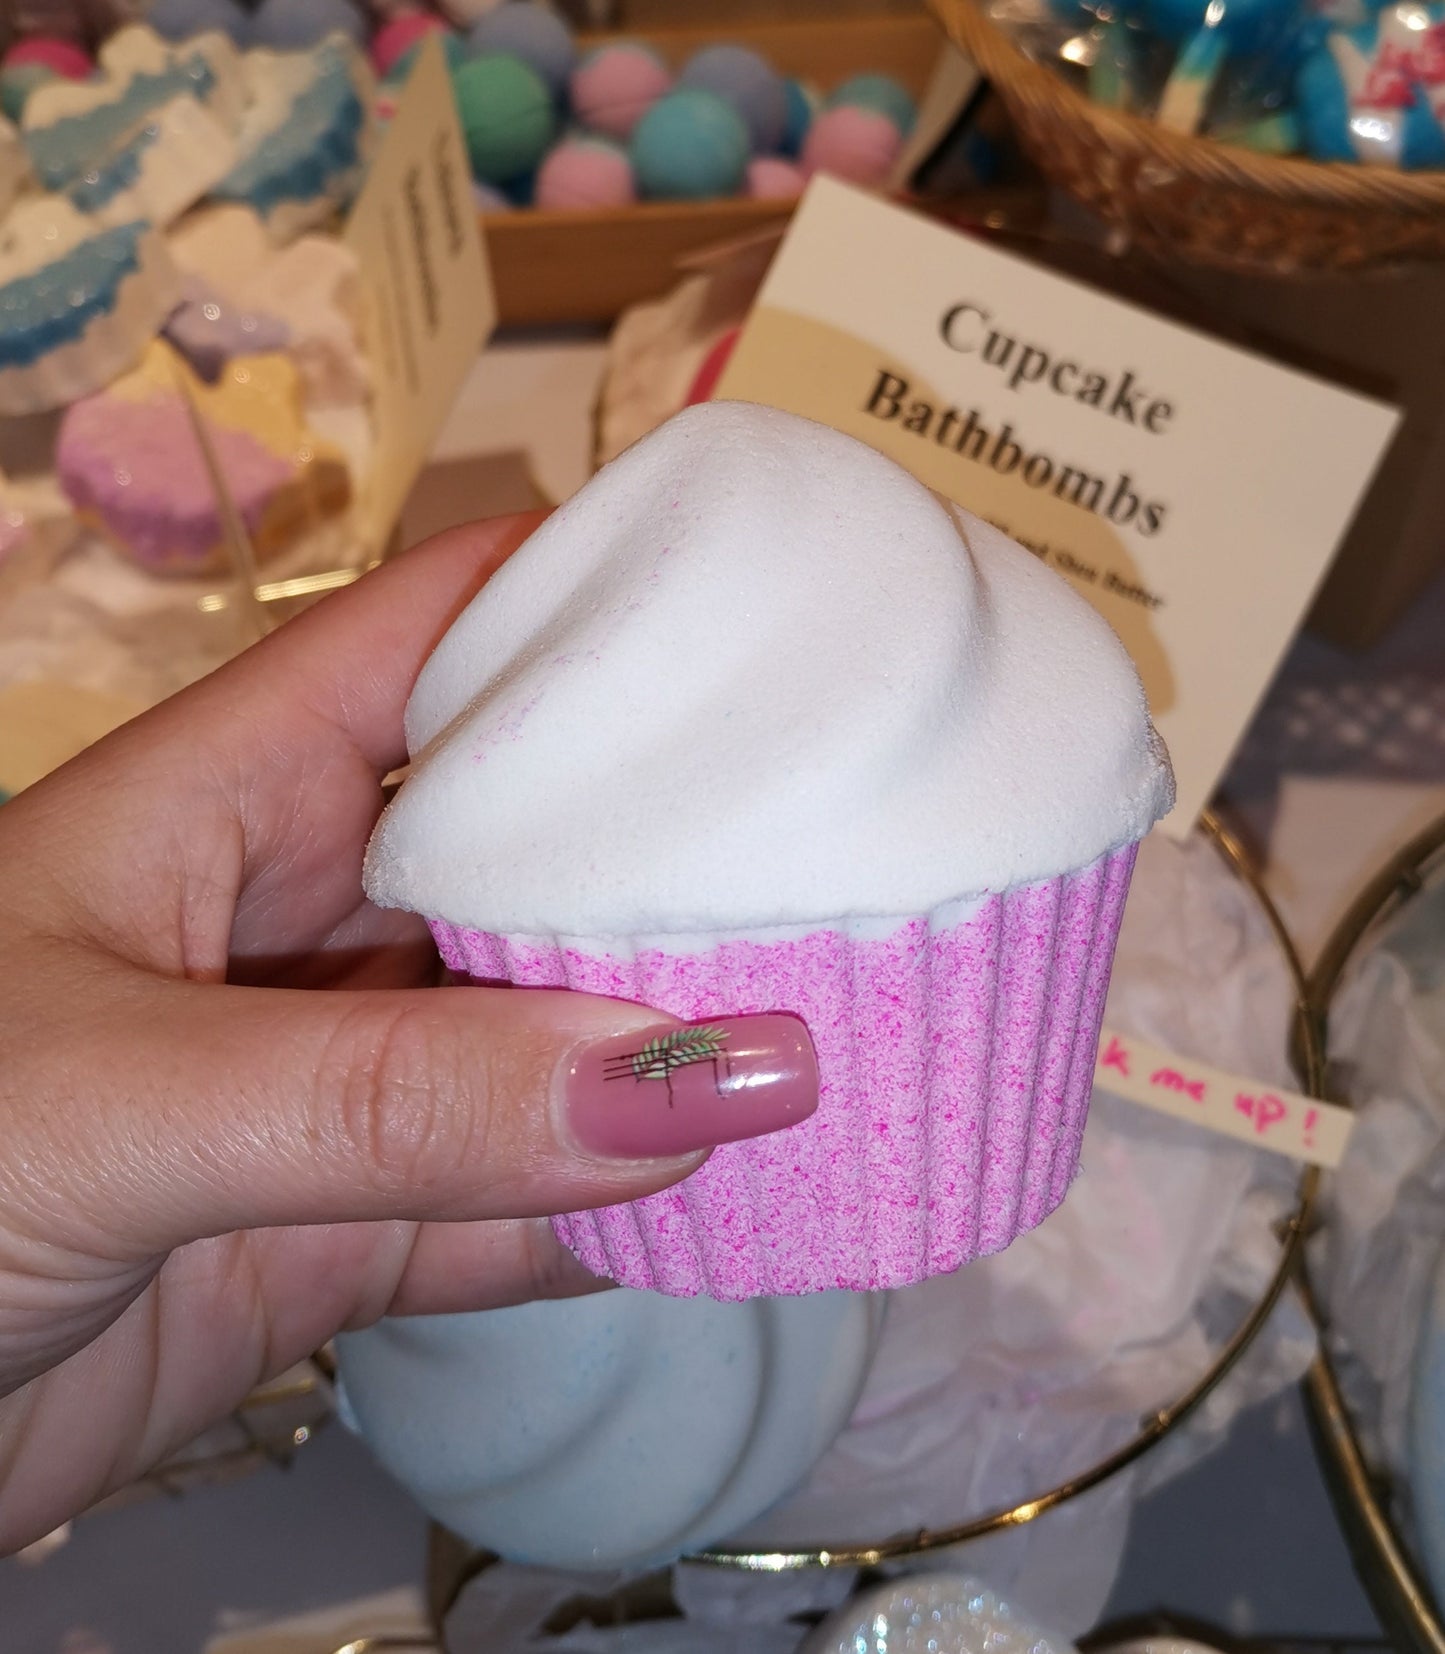 Cupcake Bath Bombs with toys inside | The Vegan Potionry